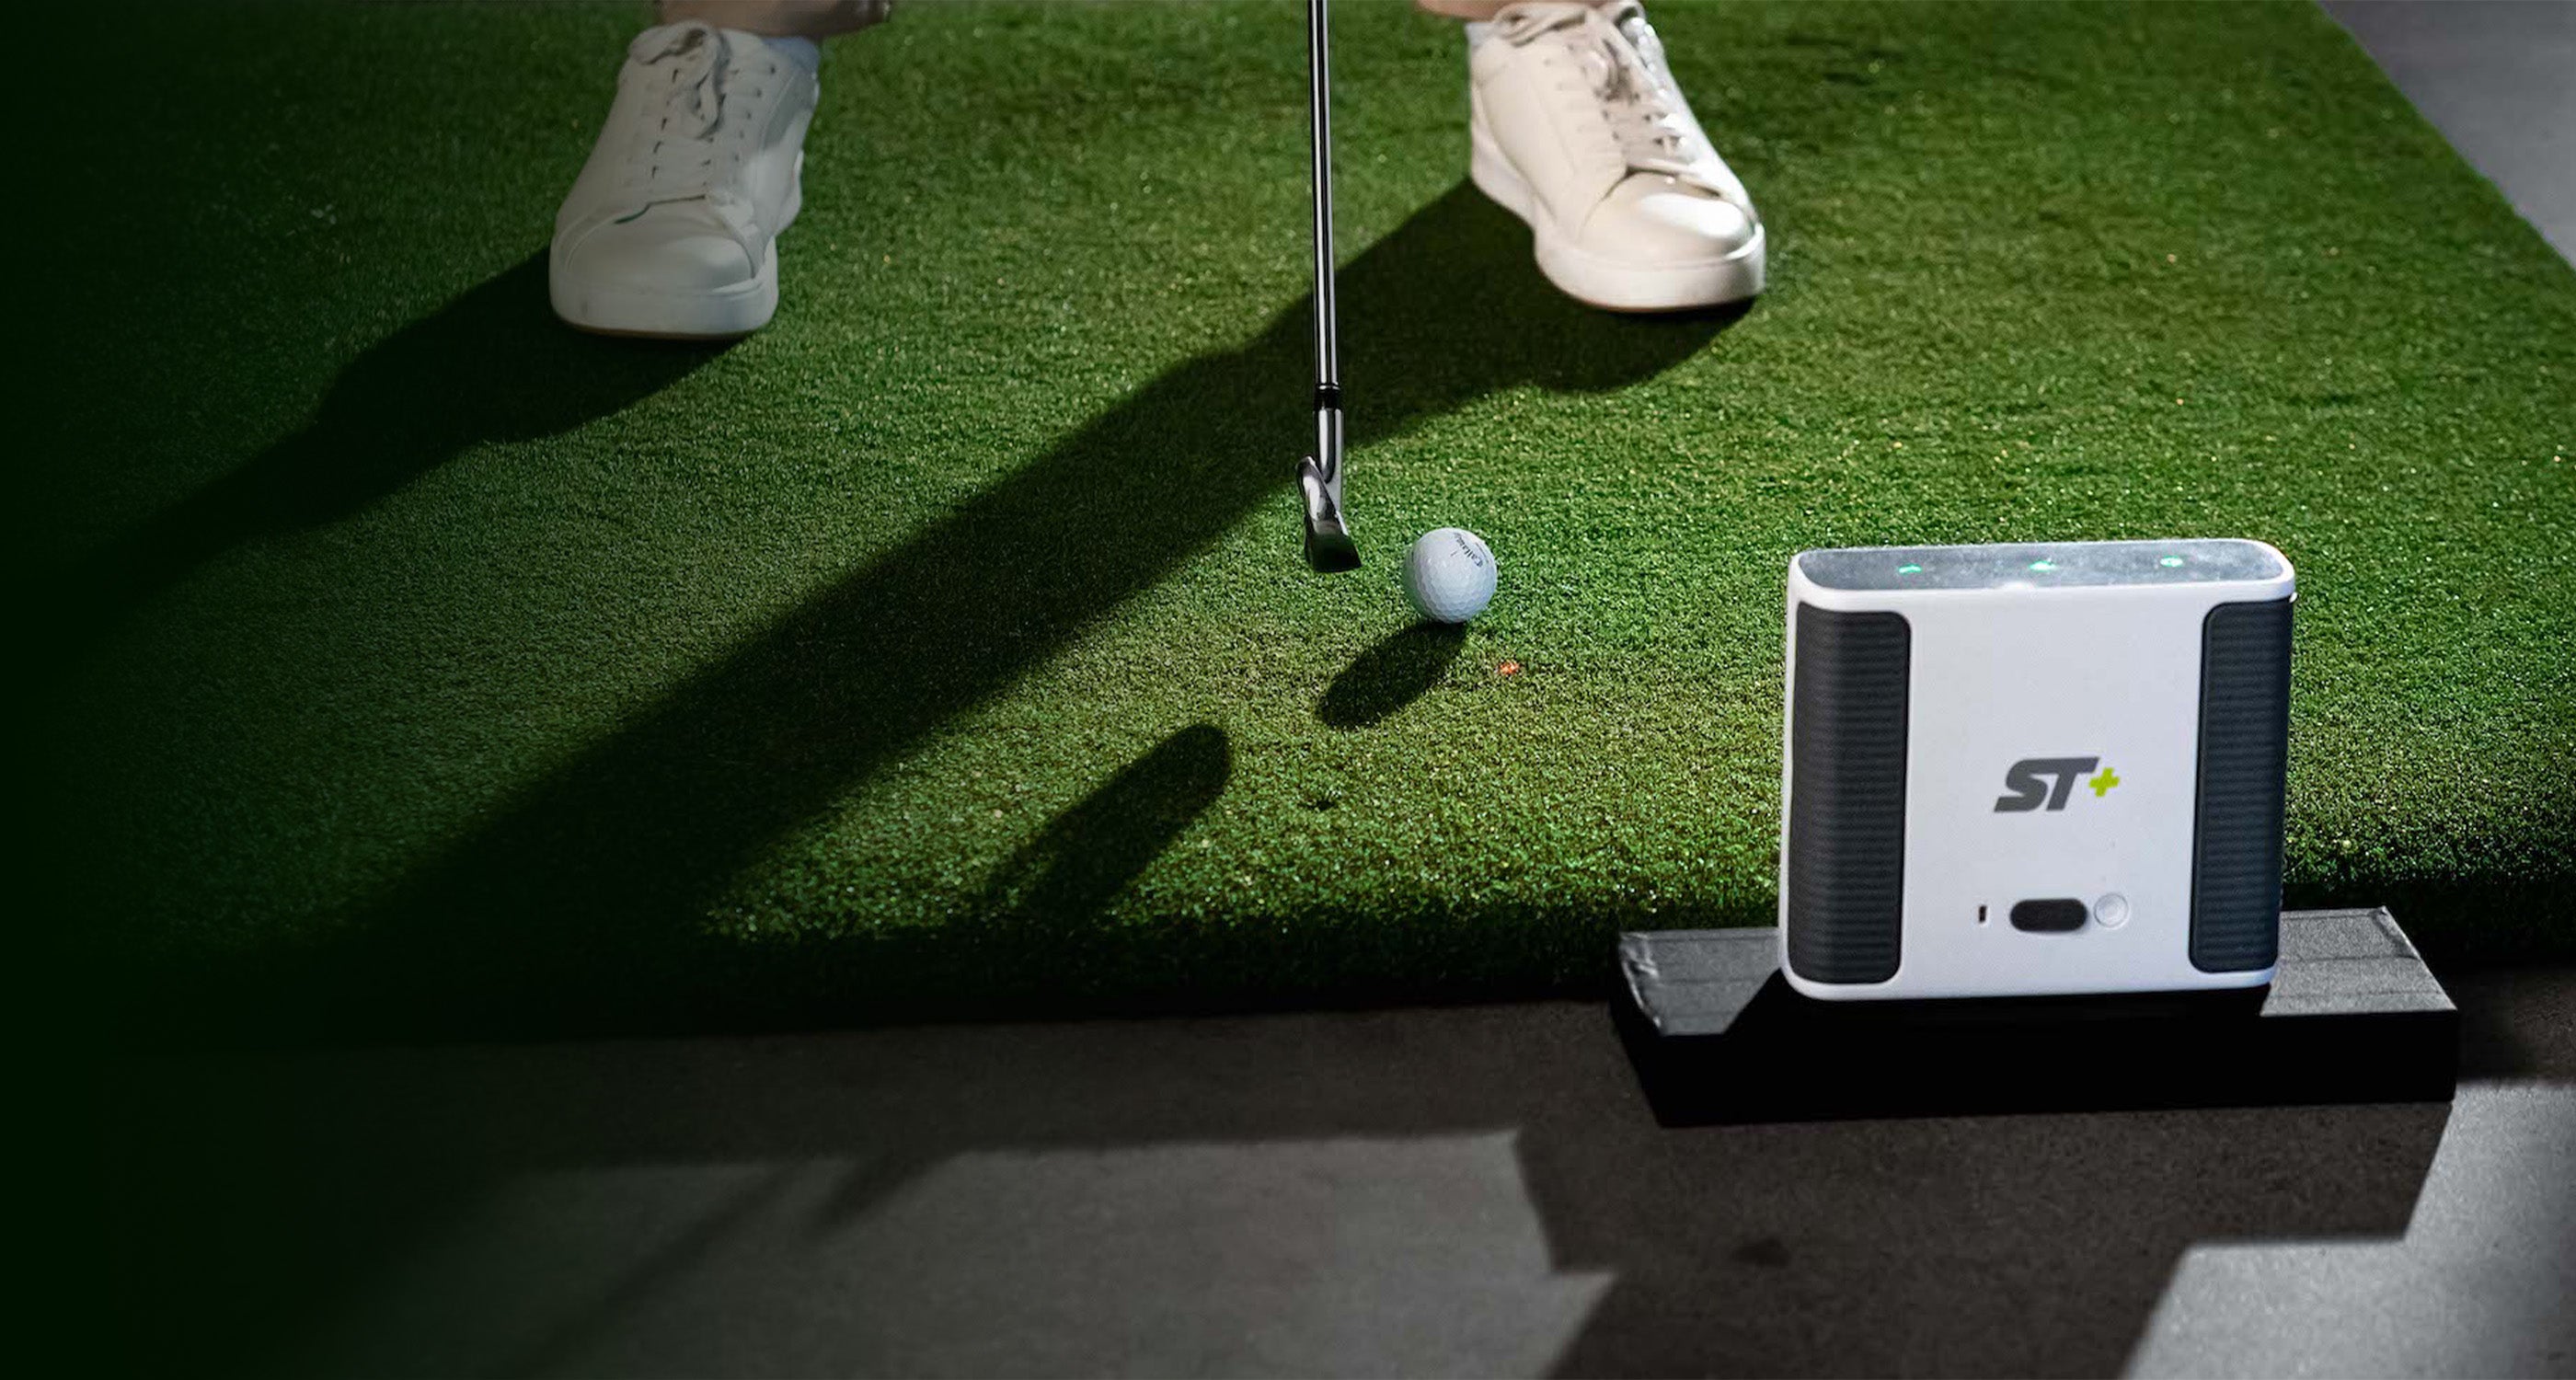 Hitting a shot on the SKYTRAK plus launch monitor off the 5 by 5 hitting mat golf sim accessory